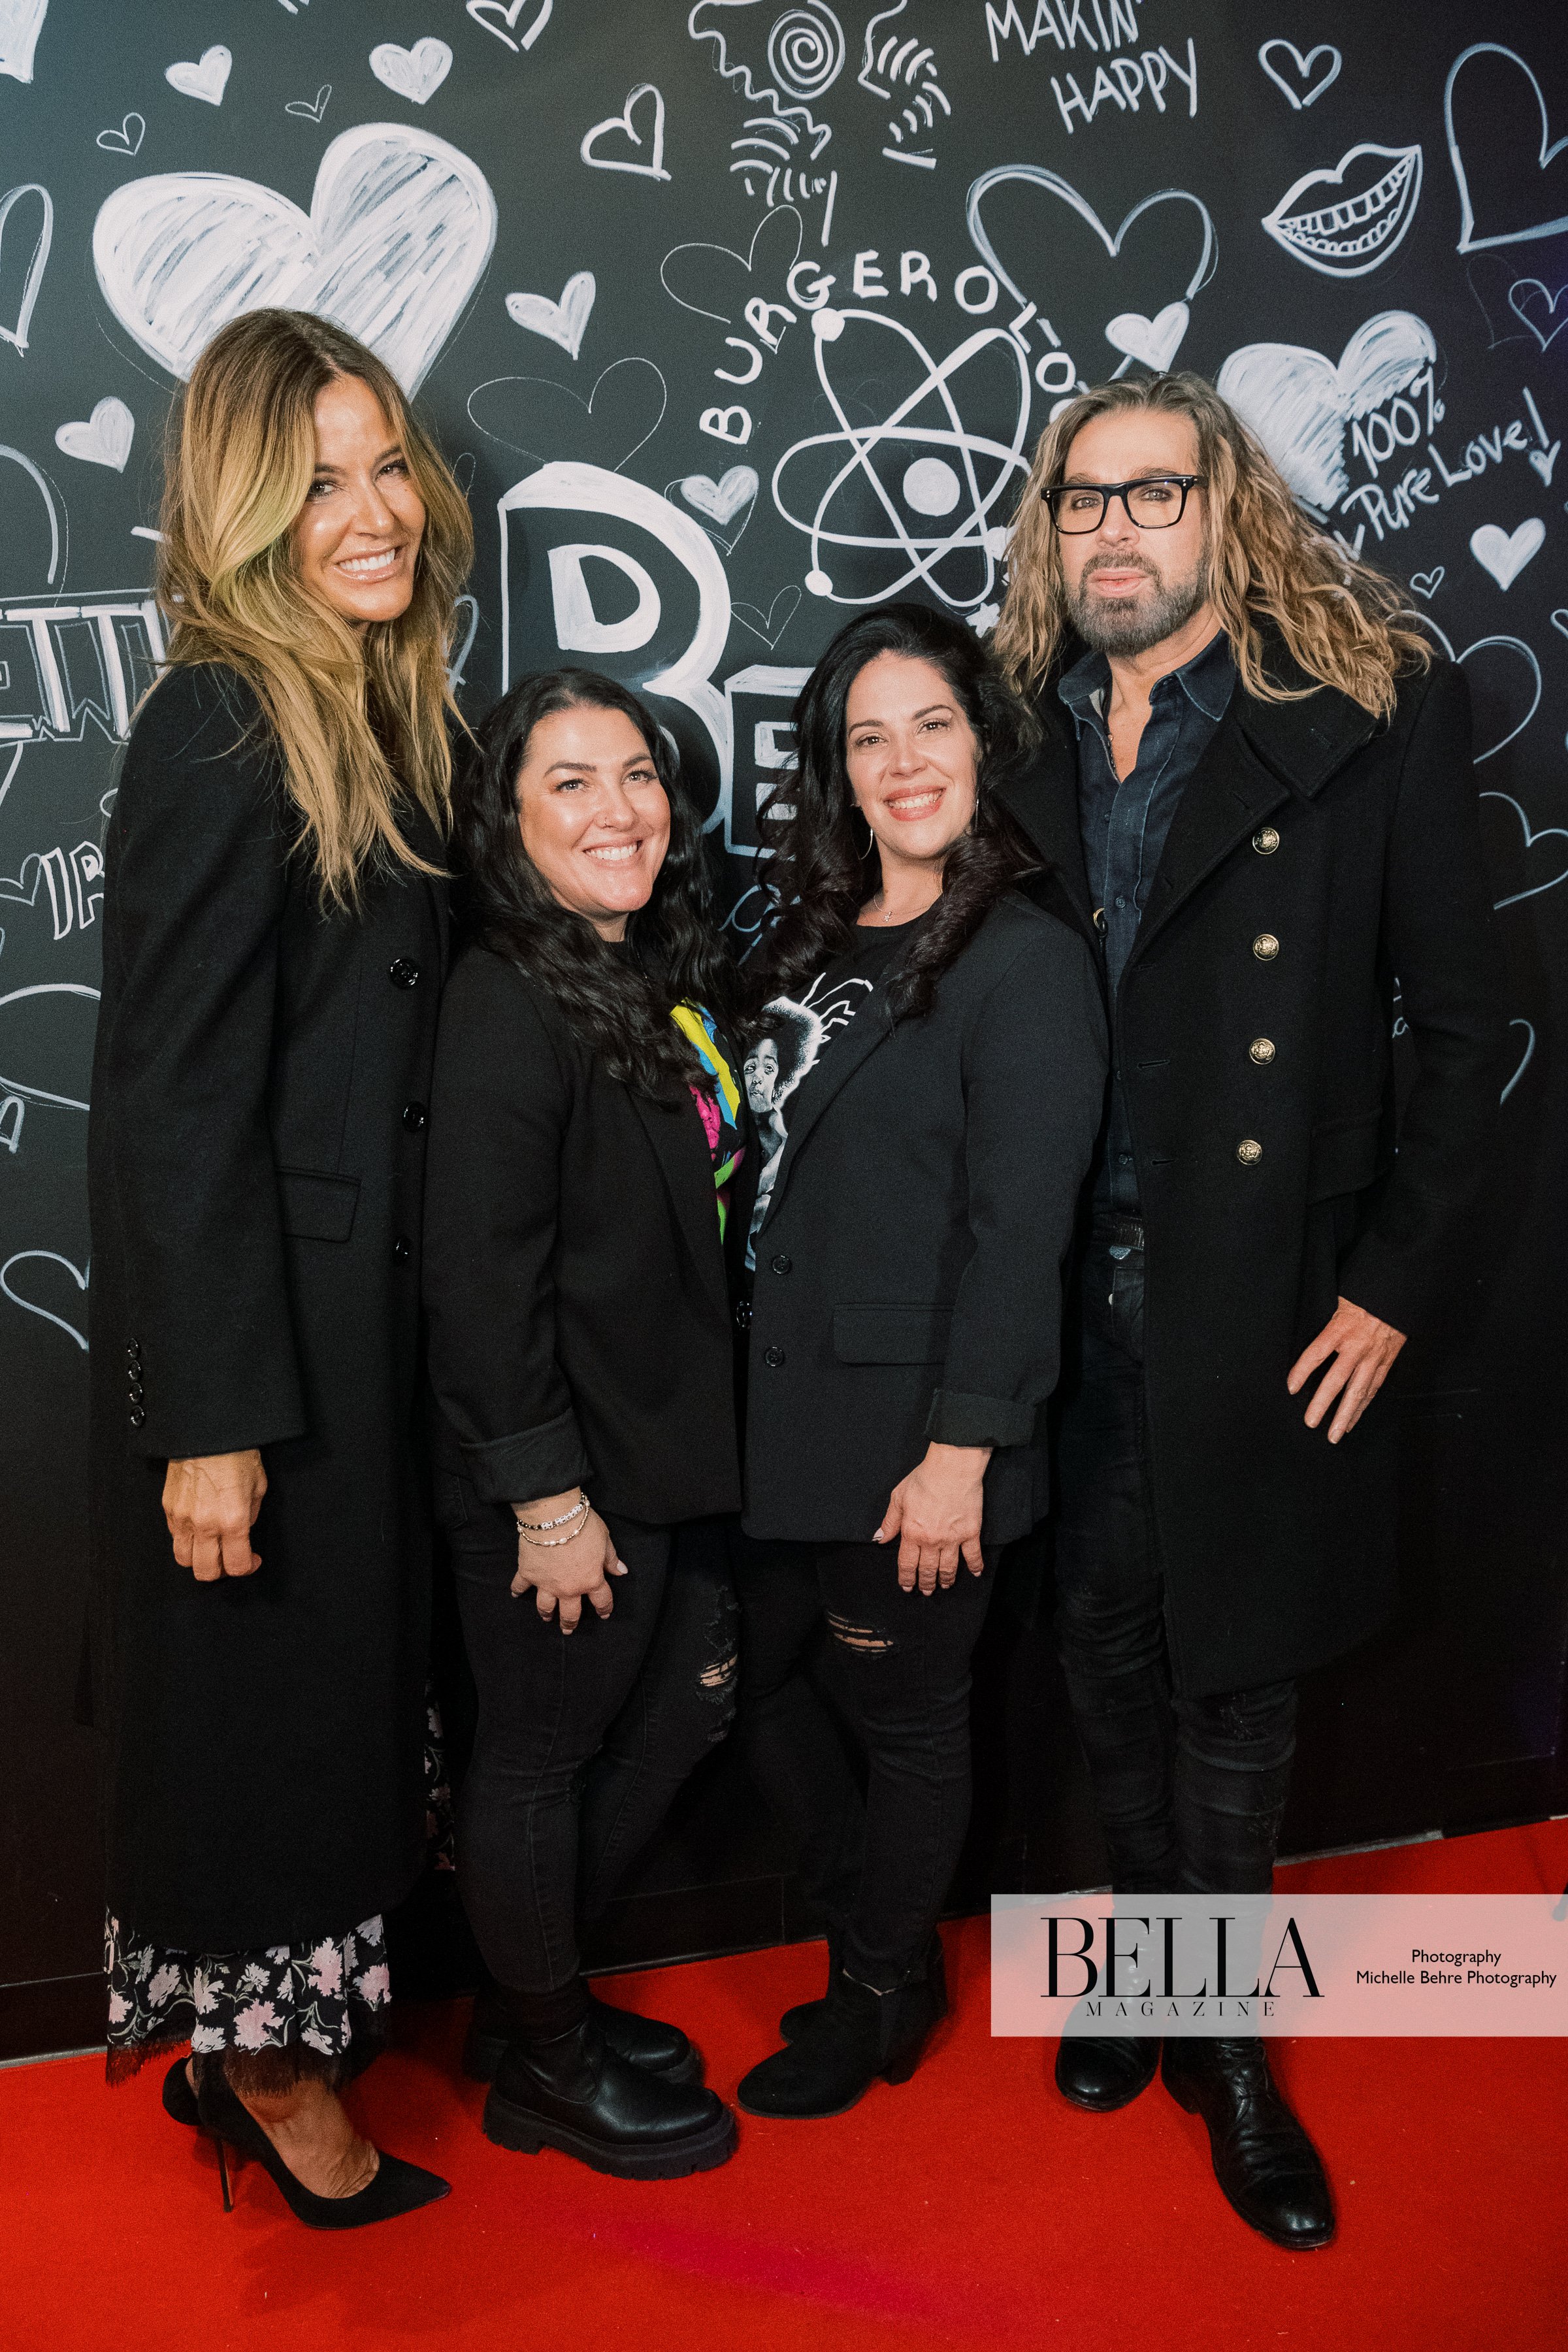 Michelle-Behre-Creative-Co-BELLA-Magazine-Women-of-Influence-Cover-Party-Burgerology-158.jpg